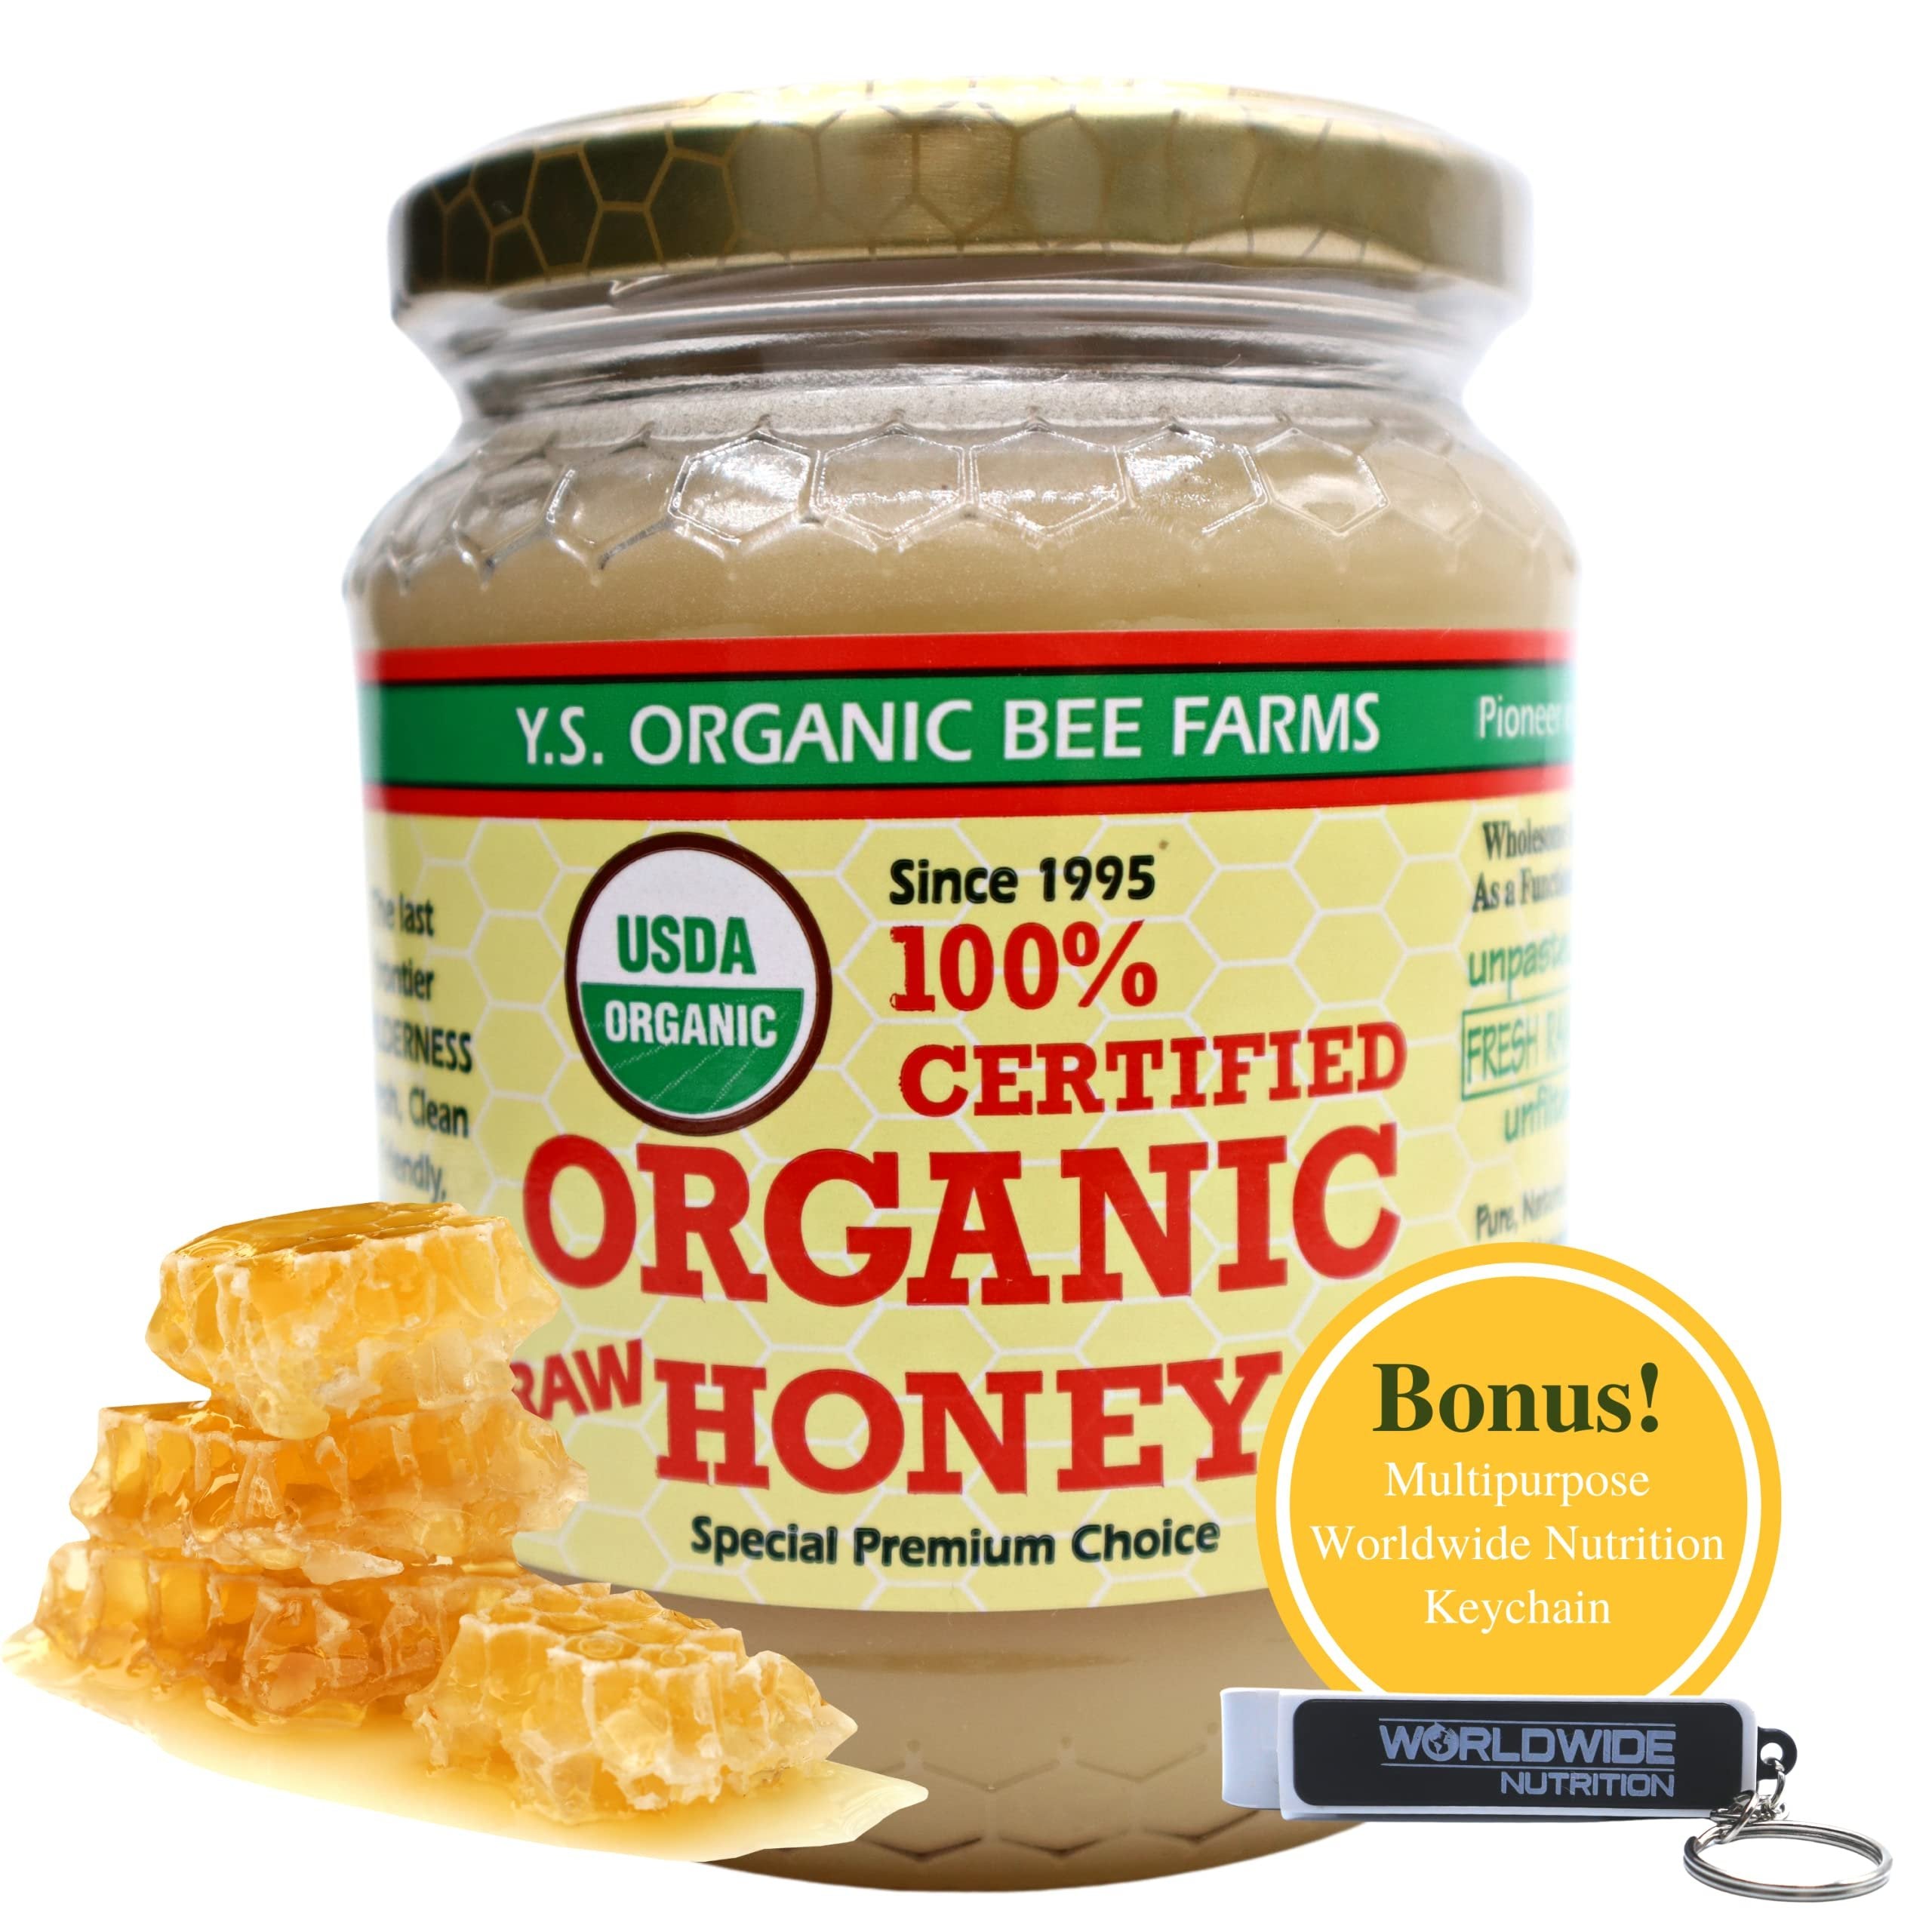 Y.S. Organic Bee Farms 100% Certified Y.S. Organic Raw Honey - Unpasteurized, Unfiltered, Pure Natural Honey - Gluten Free Organic Food and Natural Sweetener - 1 Lb Honey Jar with Bonus Key Chain